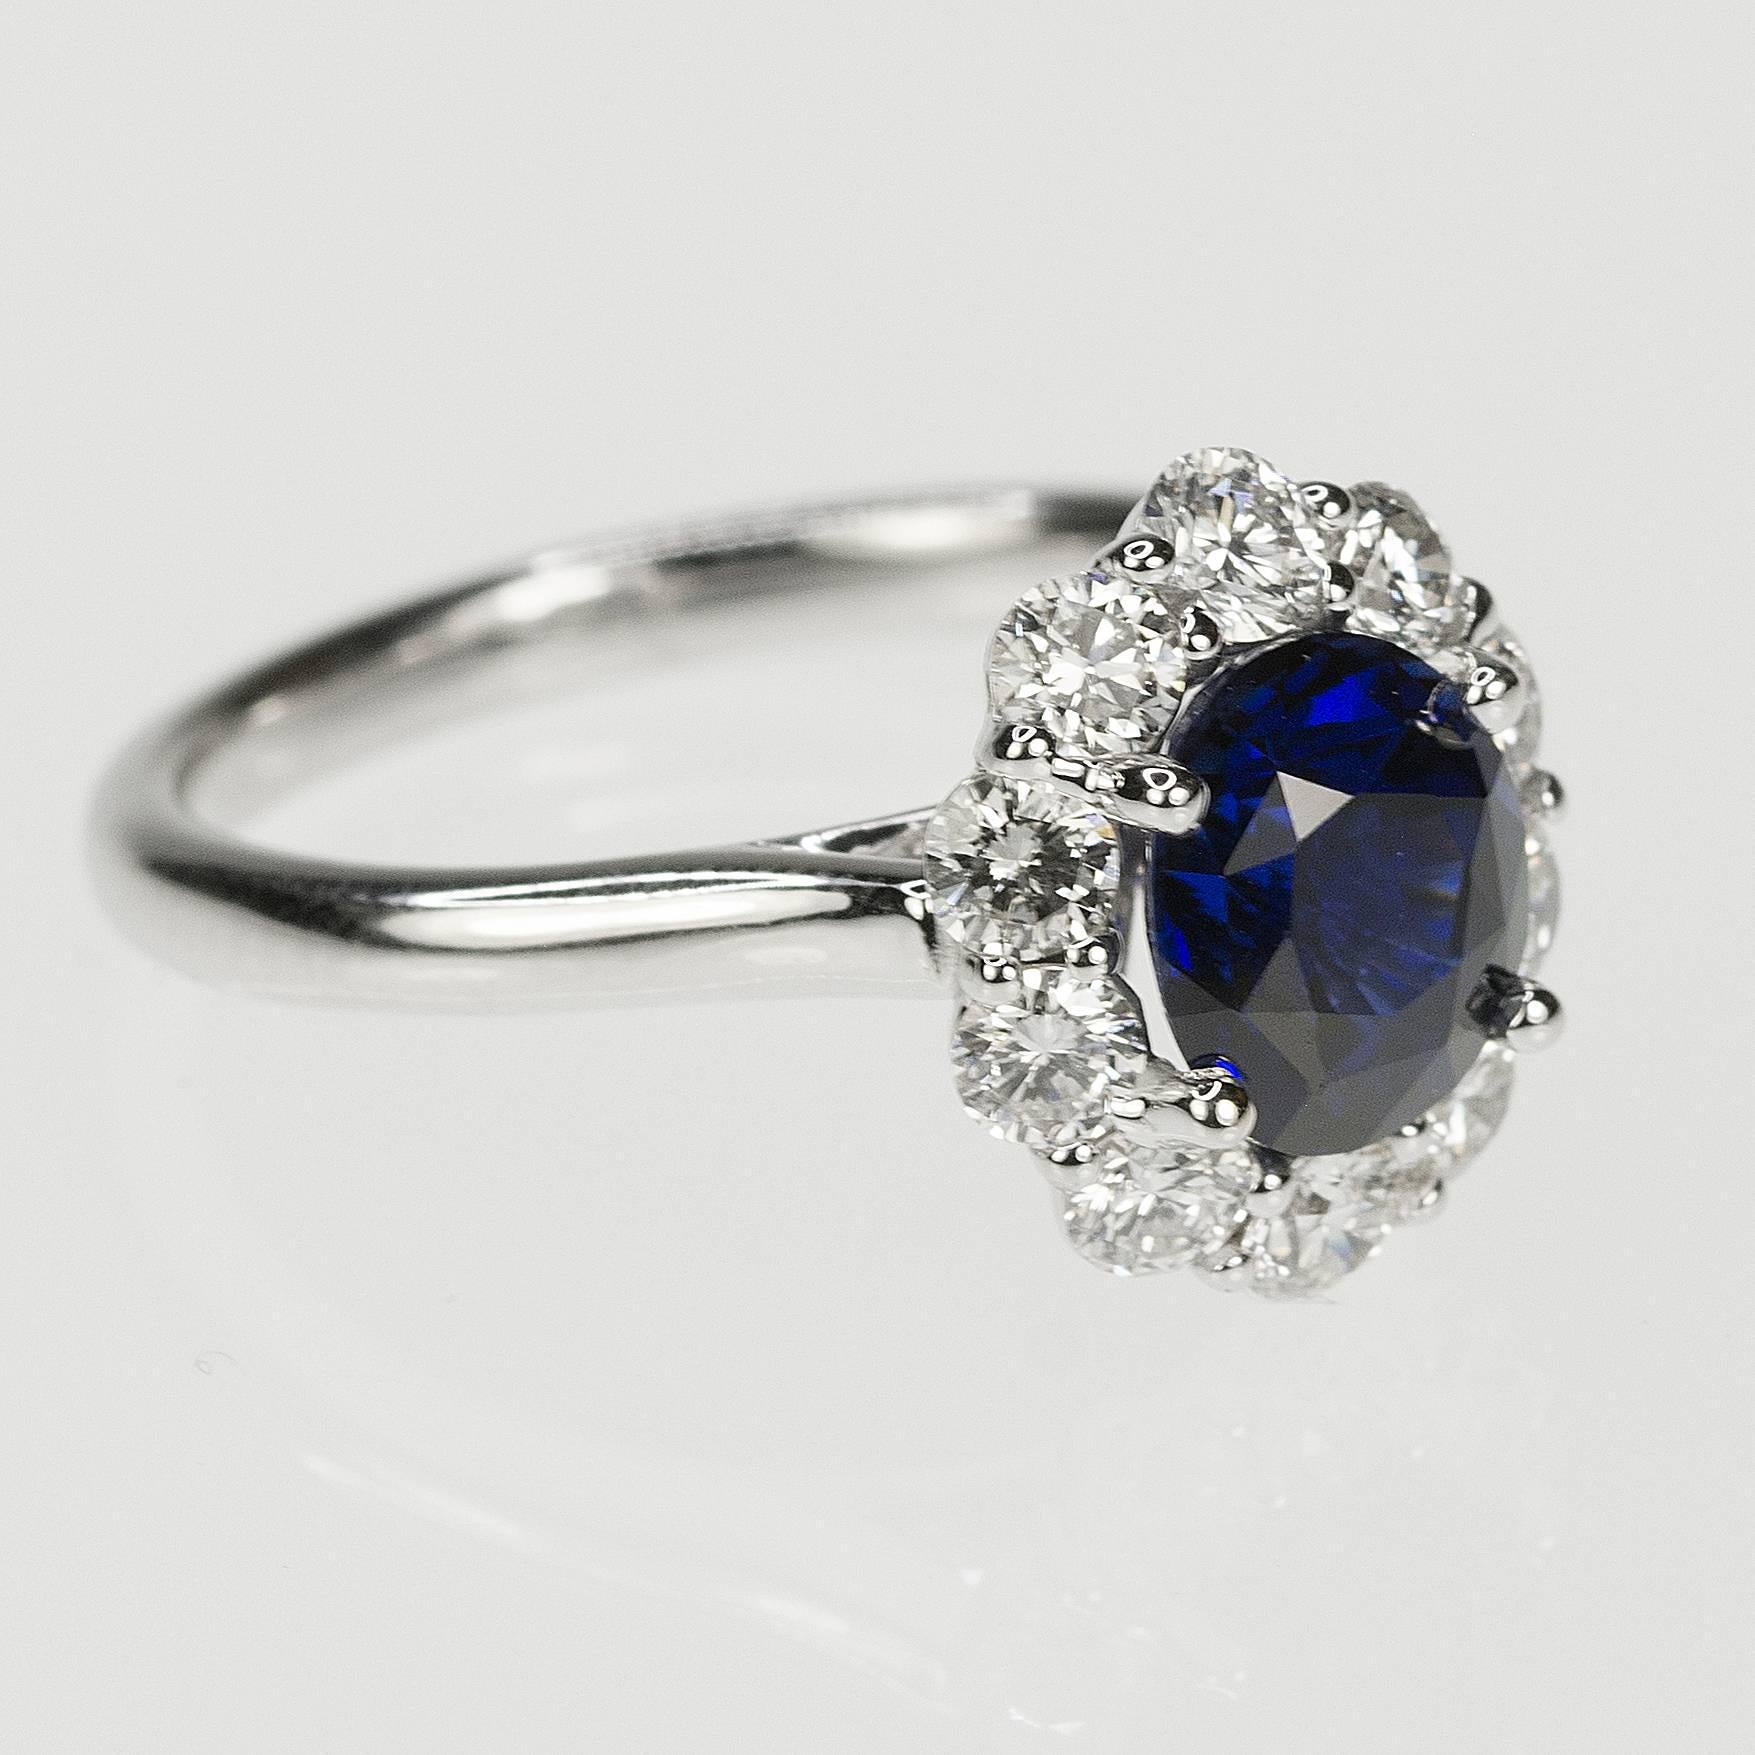 18k white gold ring with certified one 2.05 carat no heat sapphire and 10 round diamonds weighing 0.89 carat.